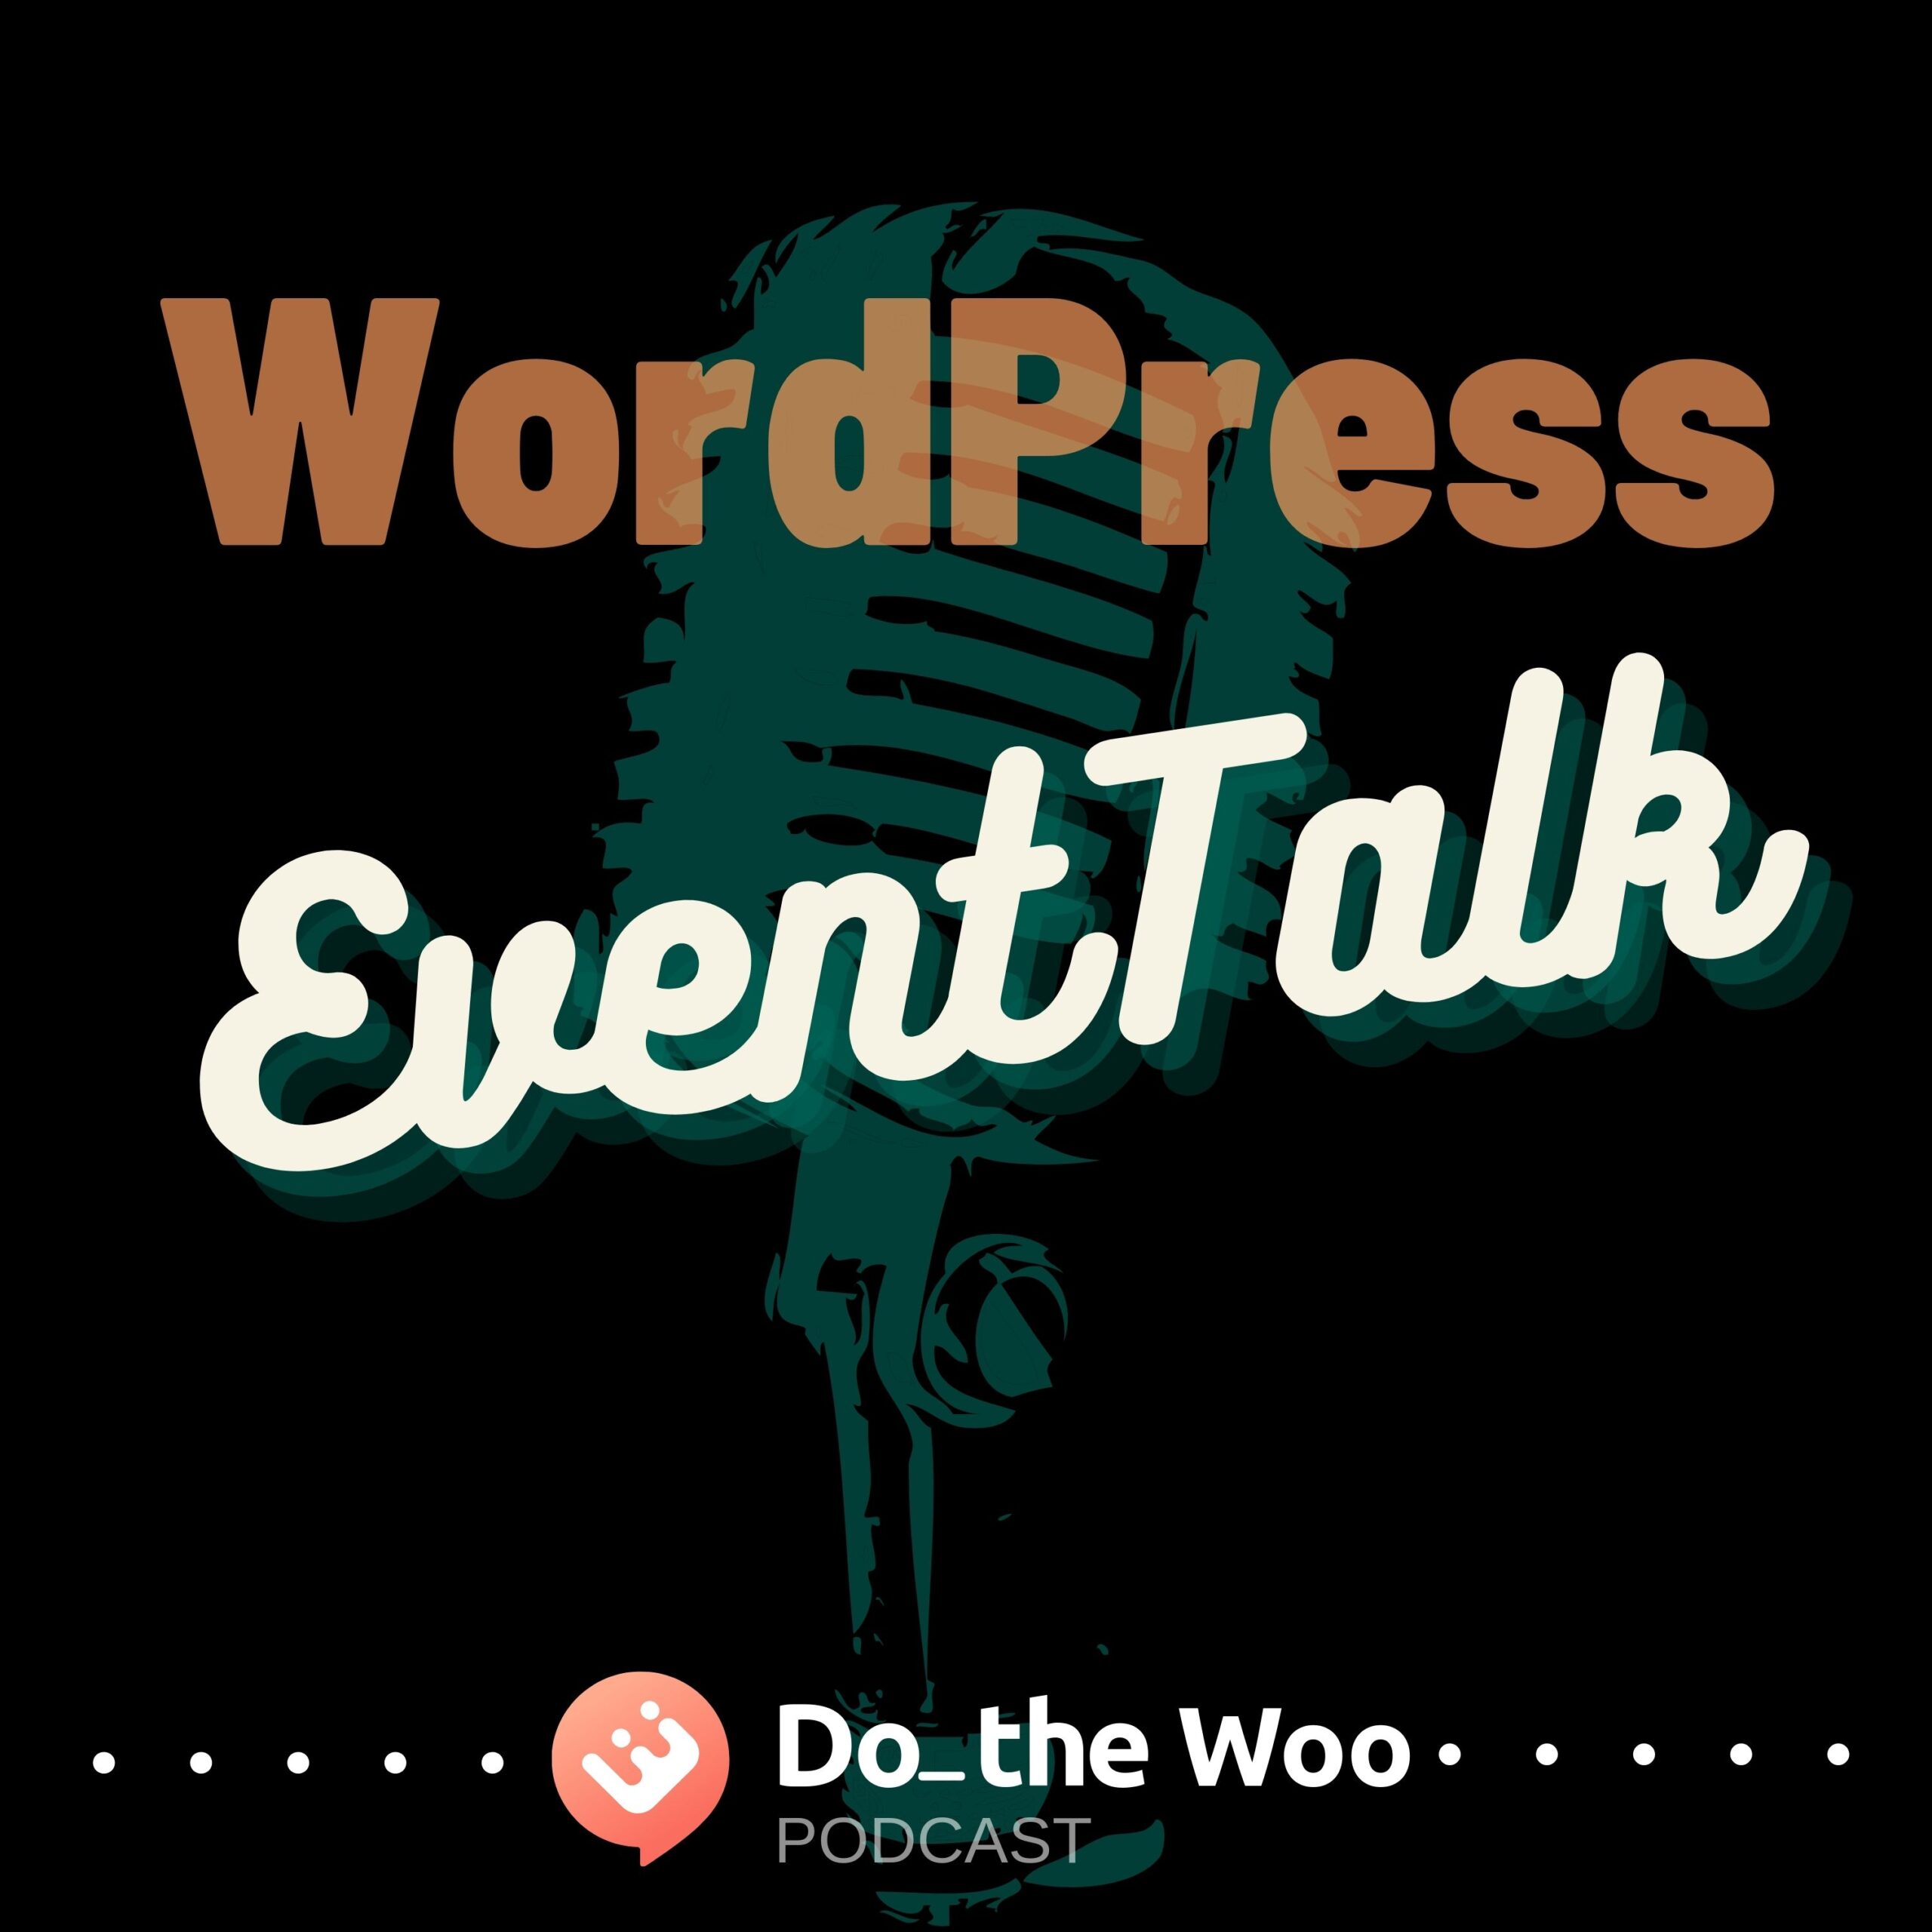 Local UK WordPress Events and More with Dan Maby, Paul Smart and Nathan Wrigley